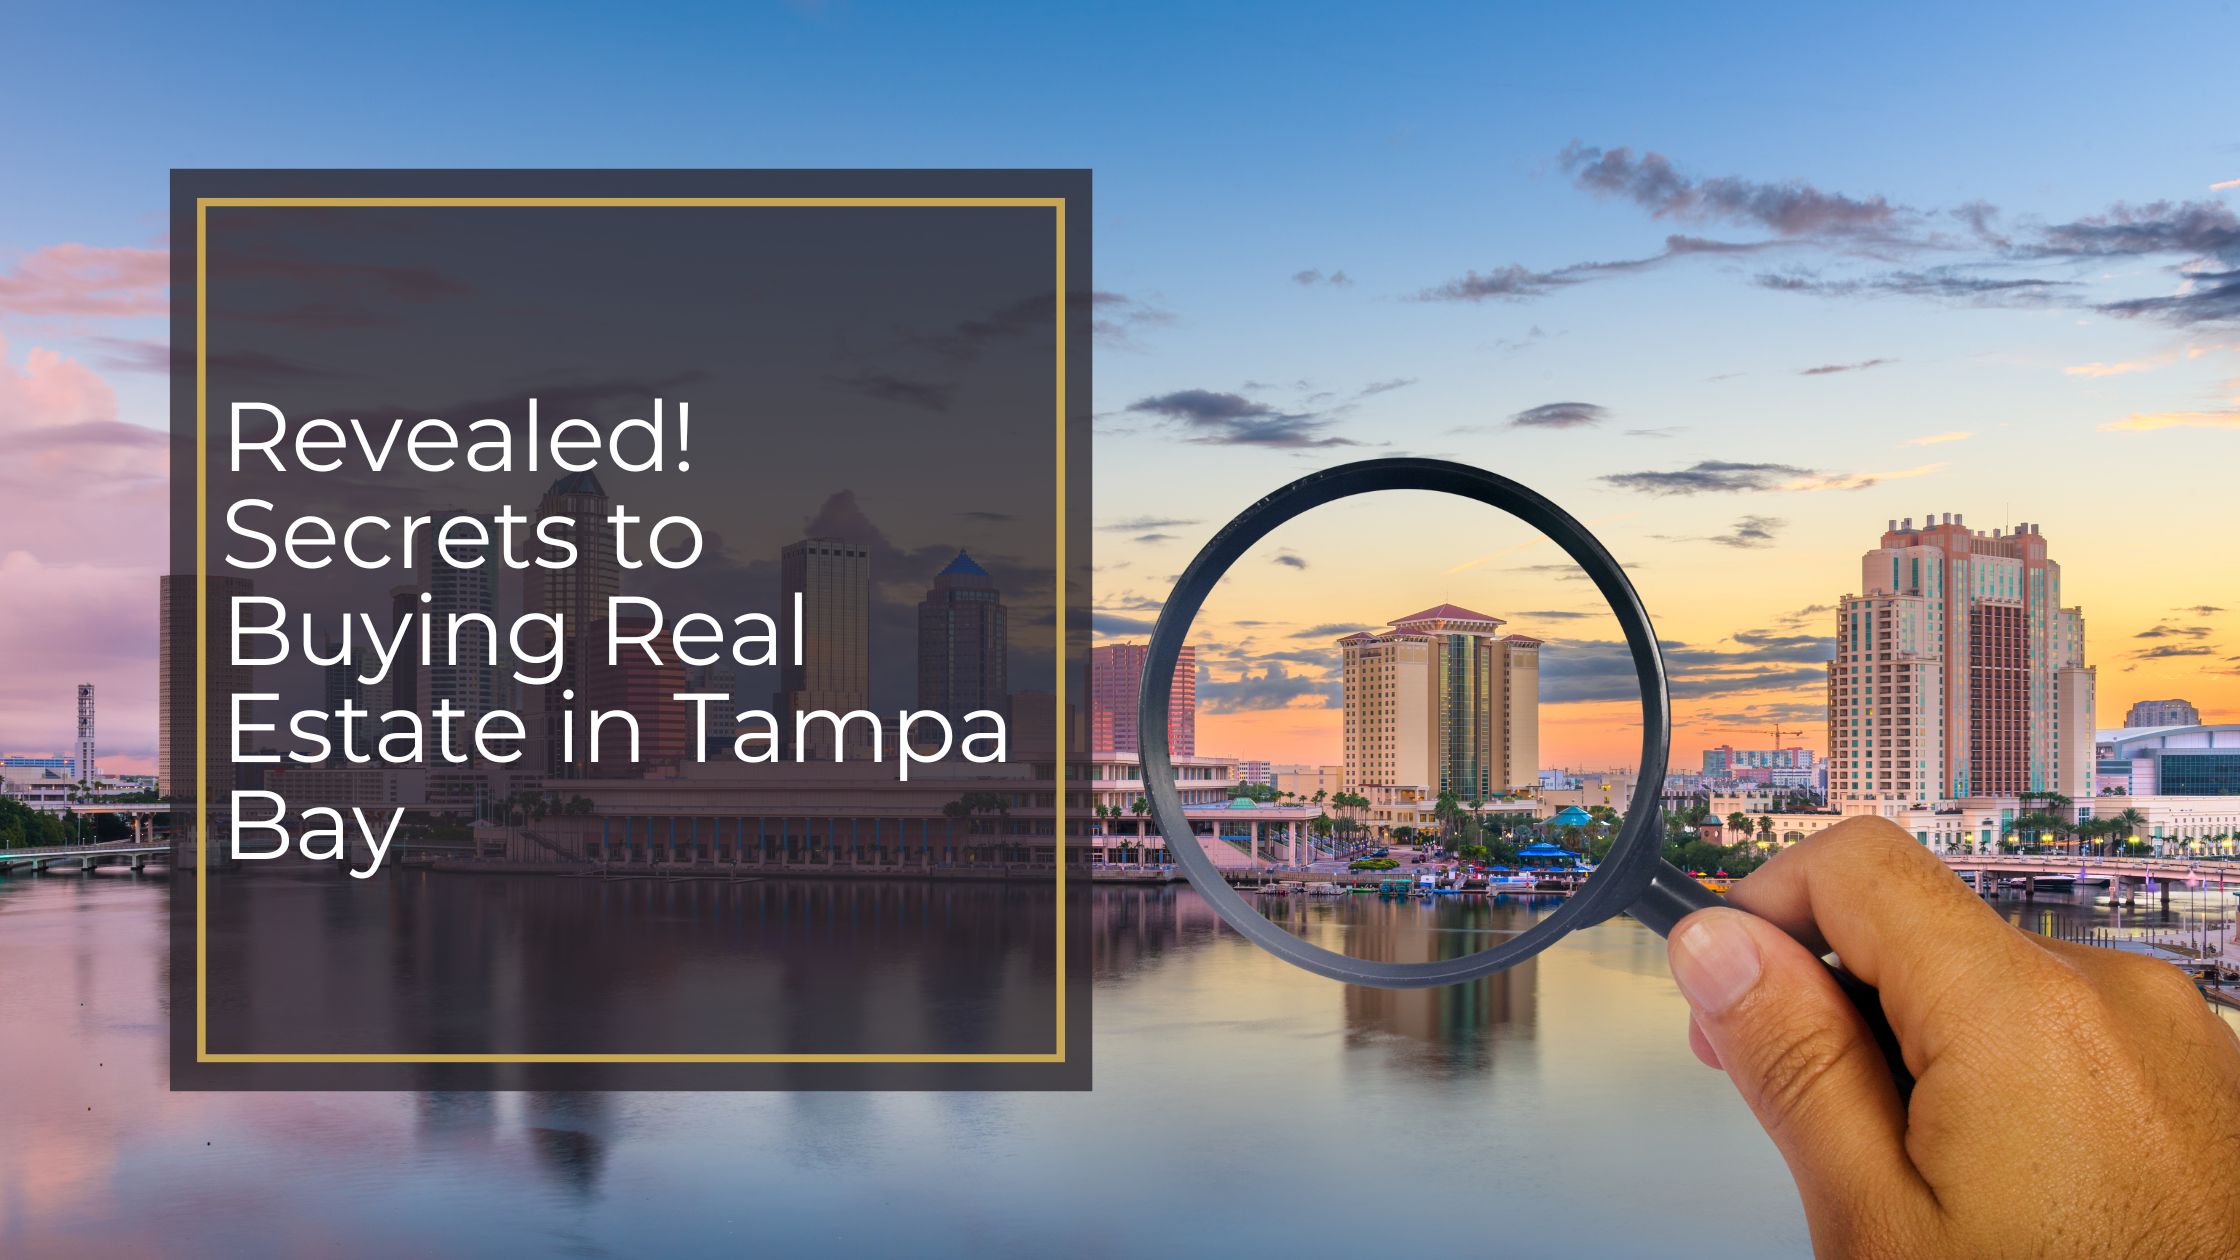 Key unlocking a house icon - Unlock the secrets to buying real estate in Tampa Bay